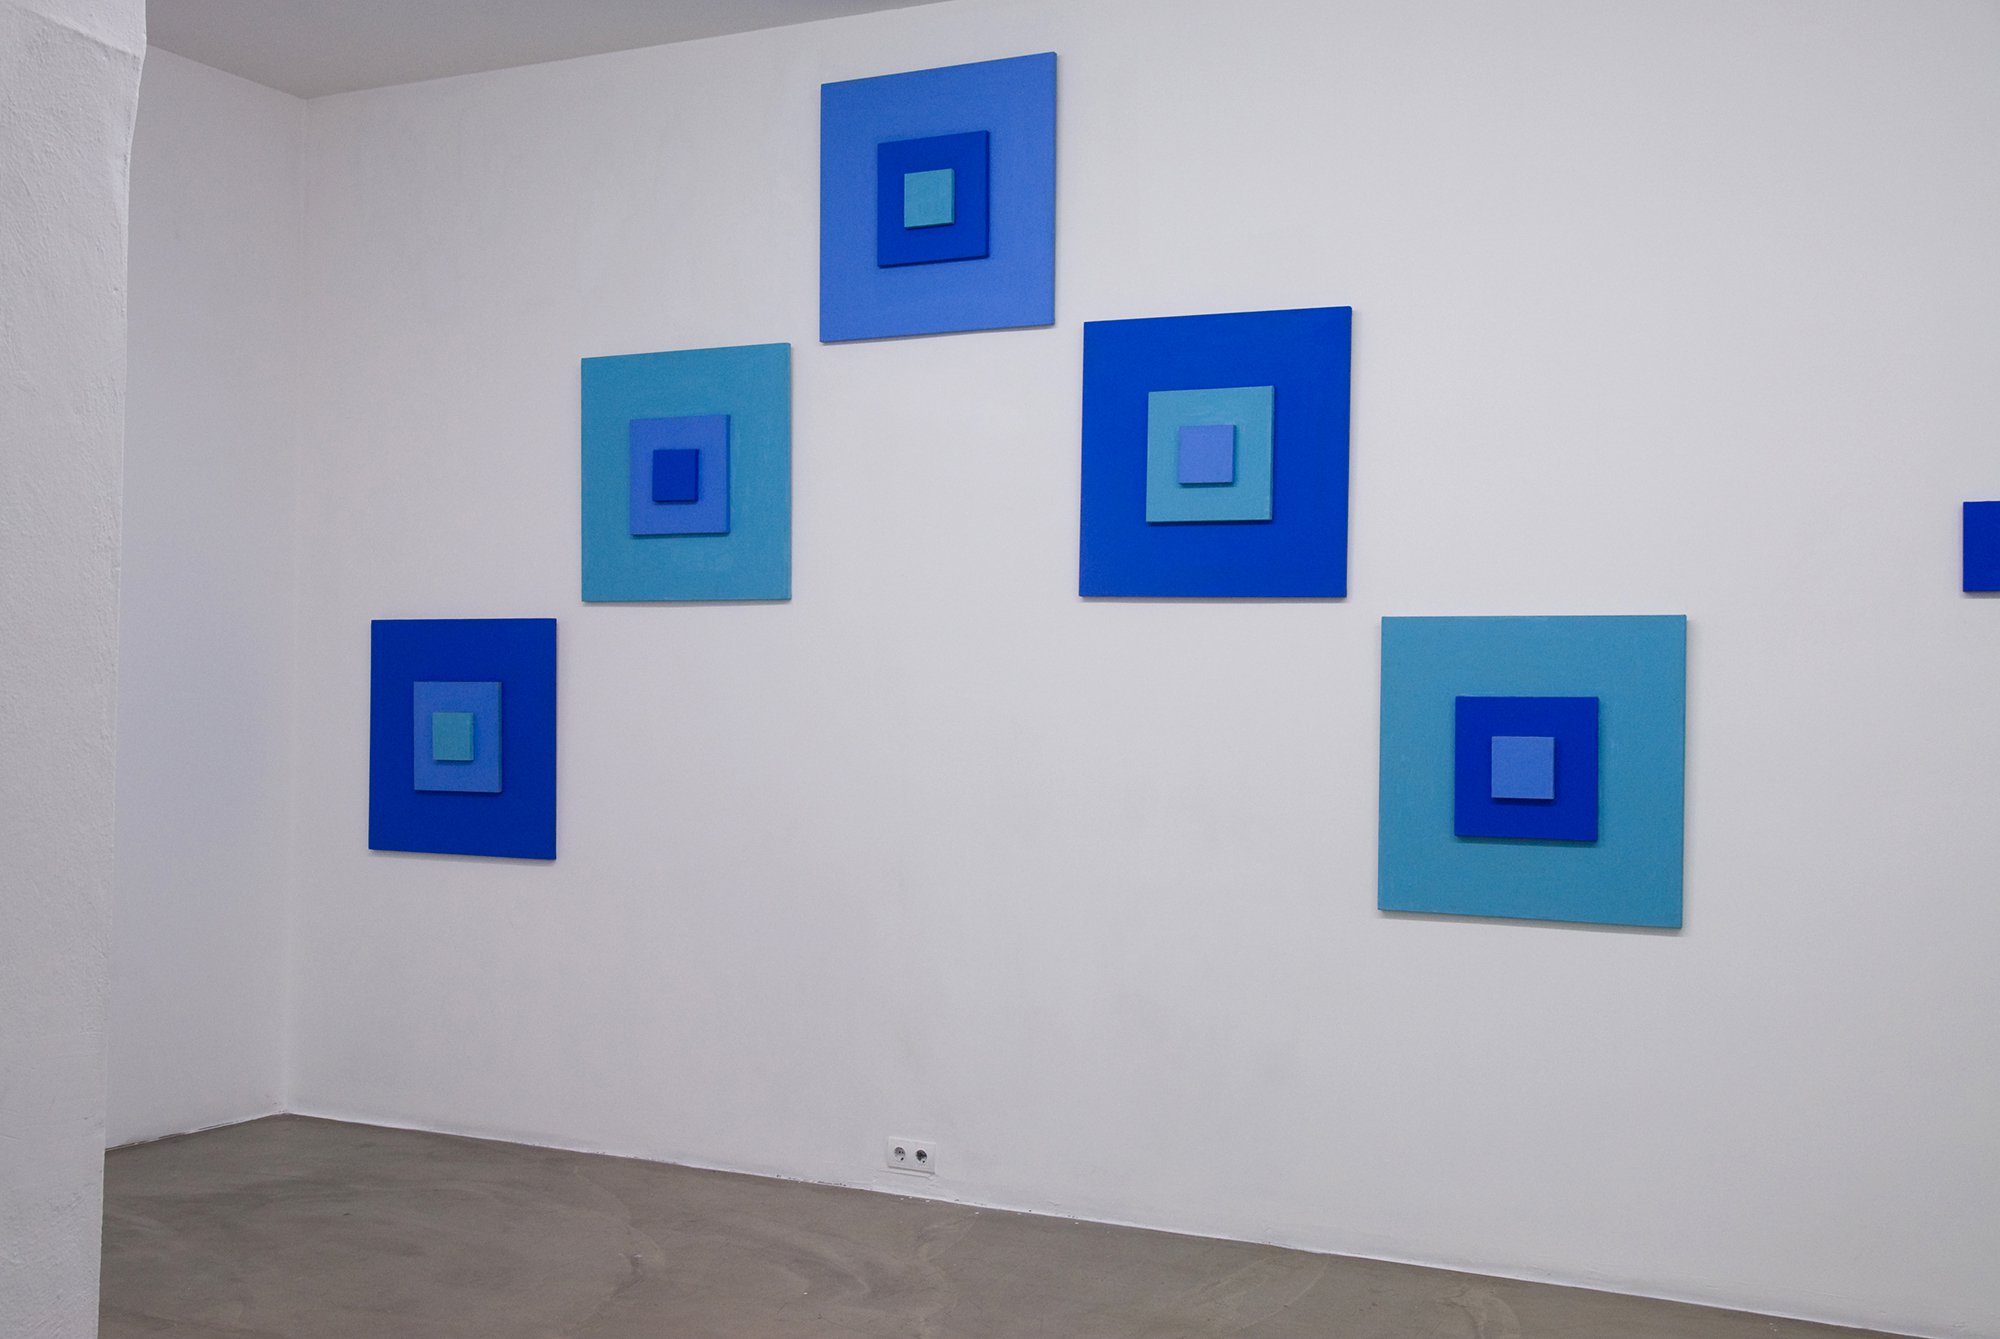 Füsun Onur, Opus 2 – Variation, 11 canvases, dimensions variable, 2003. Installation view, Odd Time Beat, Rodeo, Istanbul, 2011